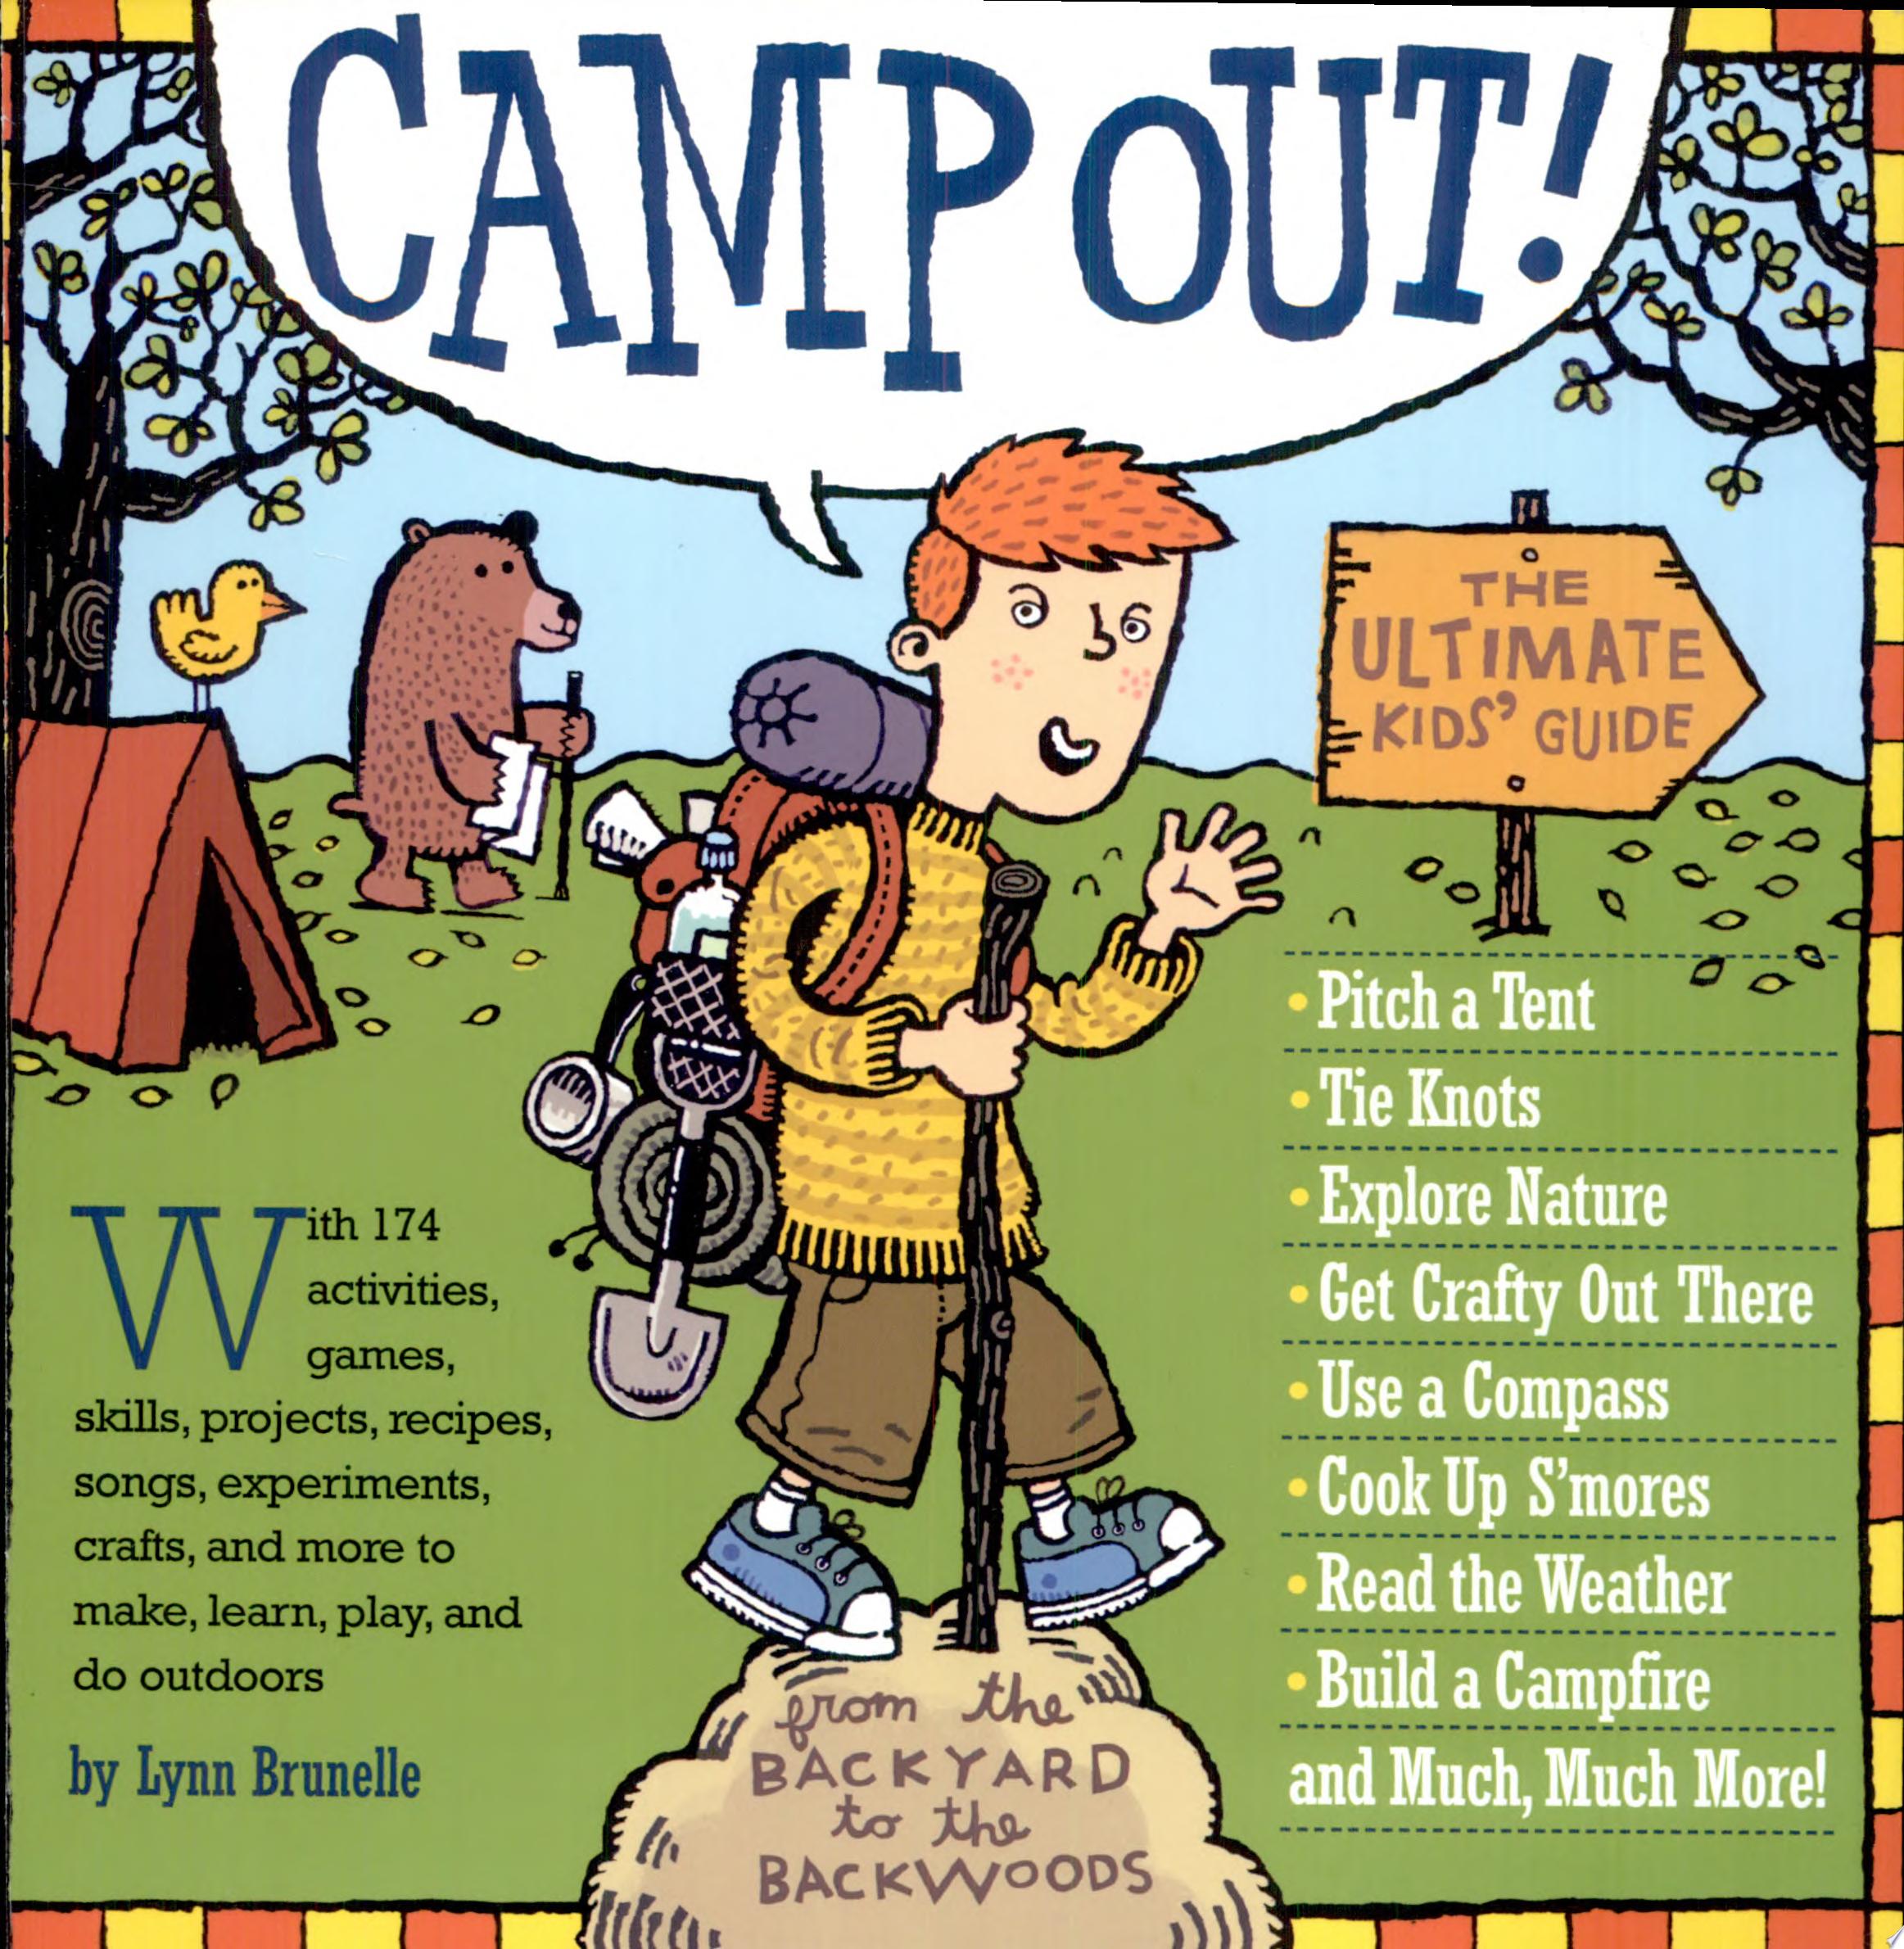 Image for "Camp Out!"